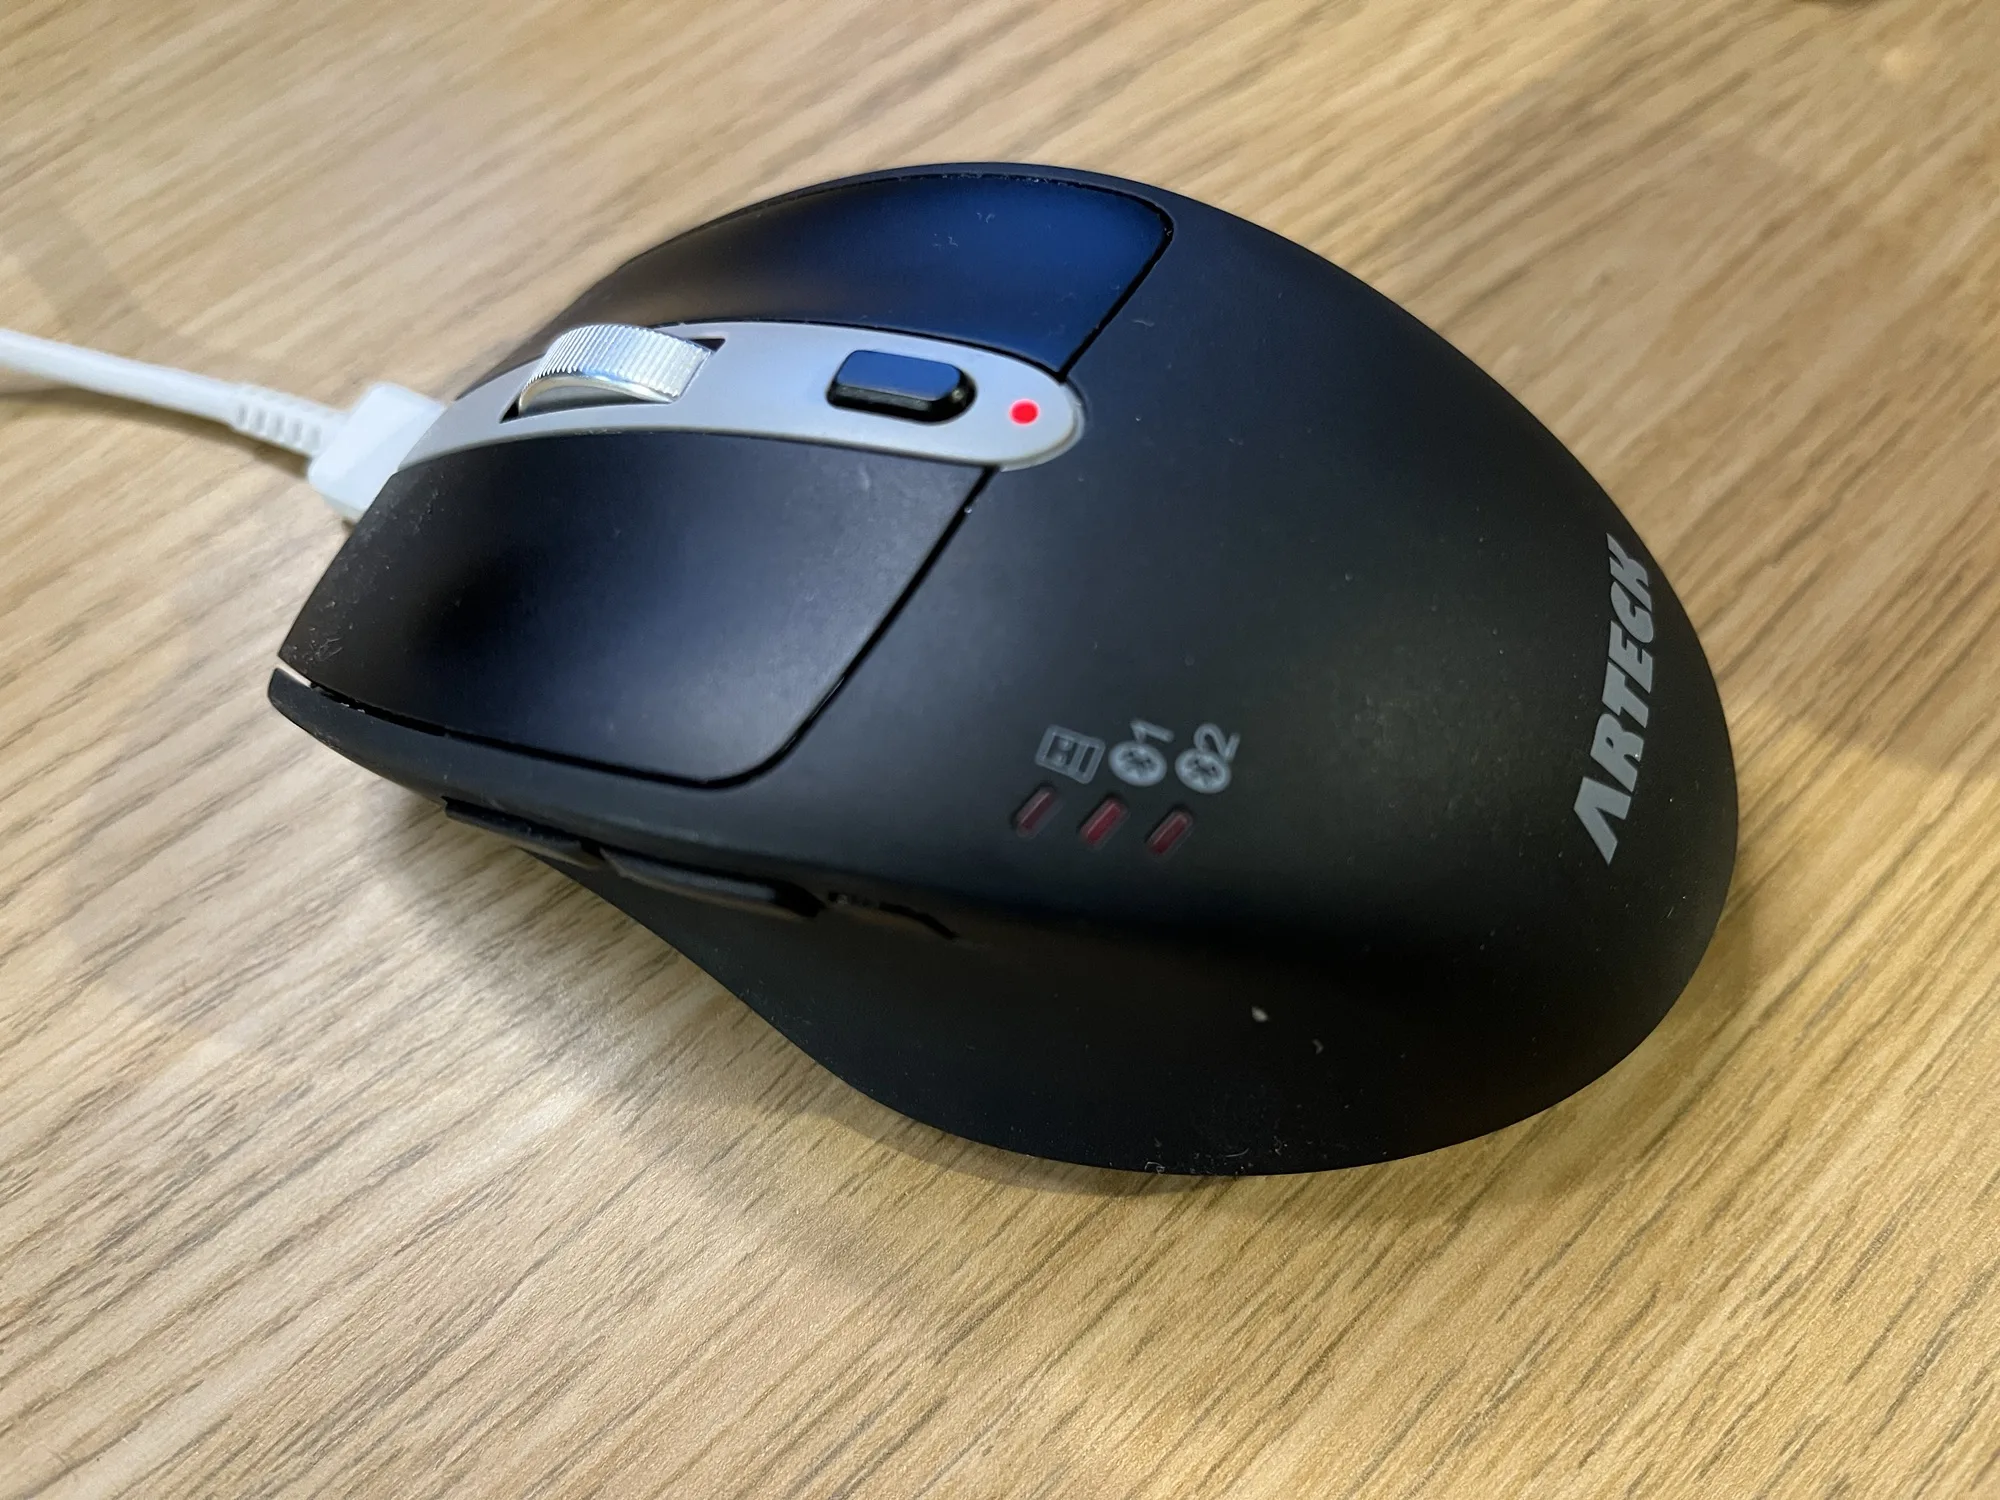 A photo of the Arteck multi device Bluetooth wireless mouse